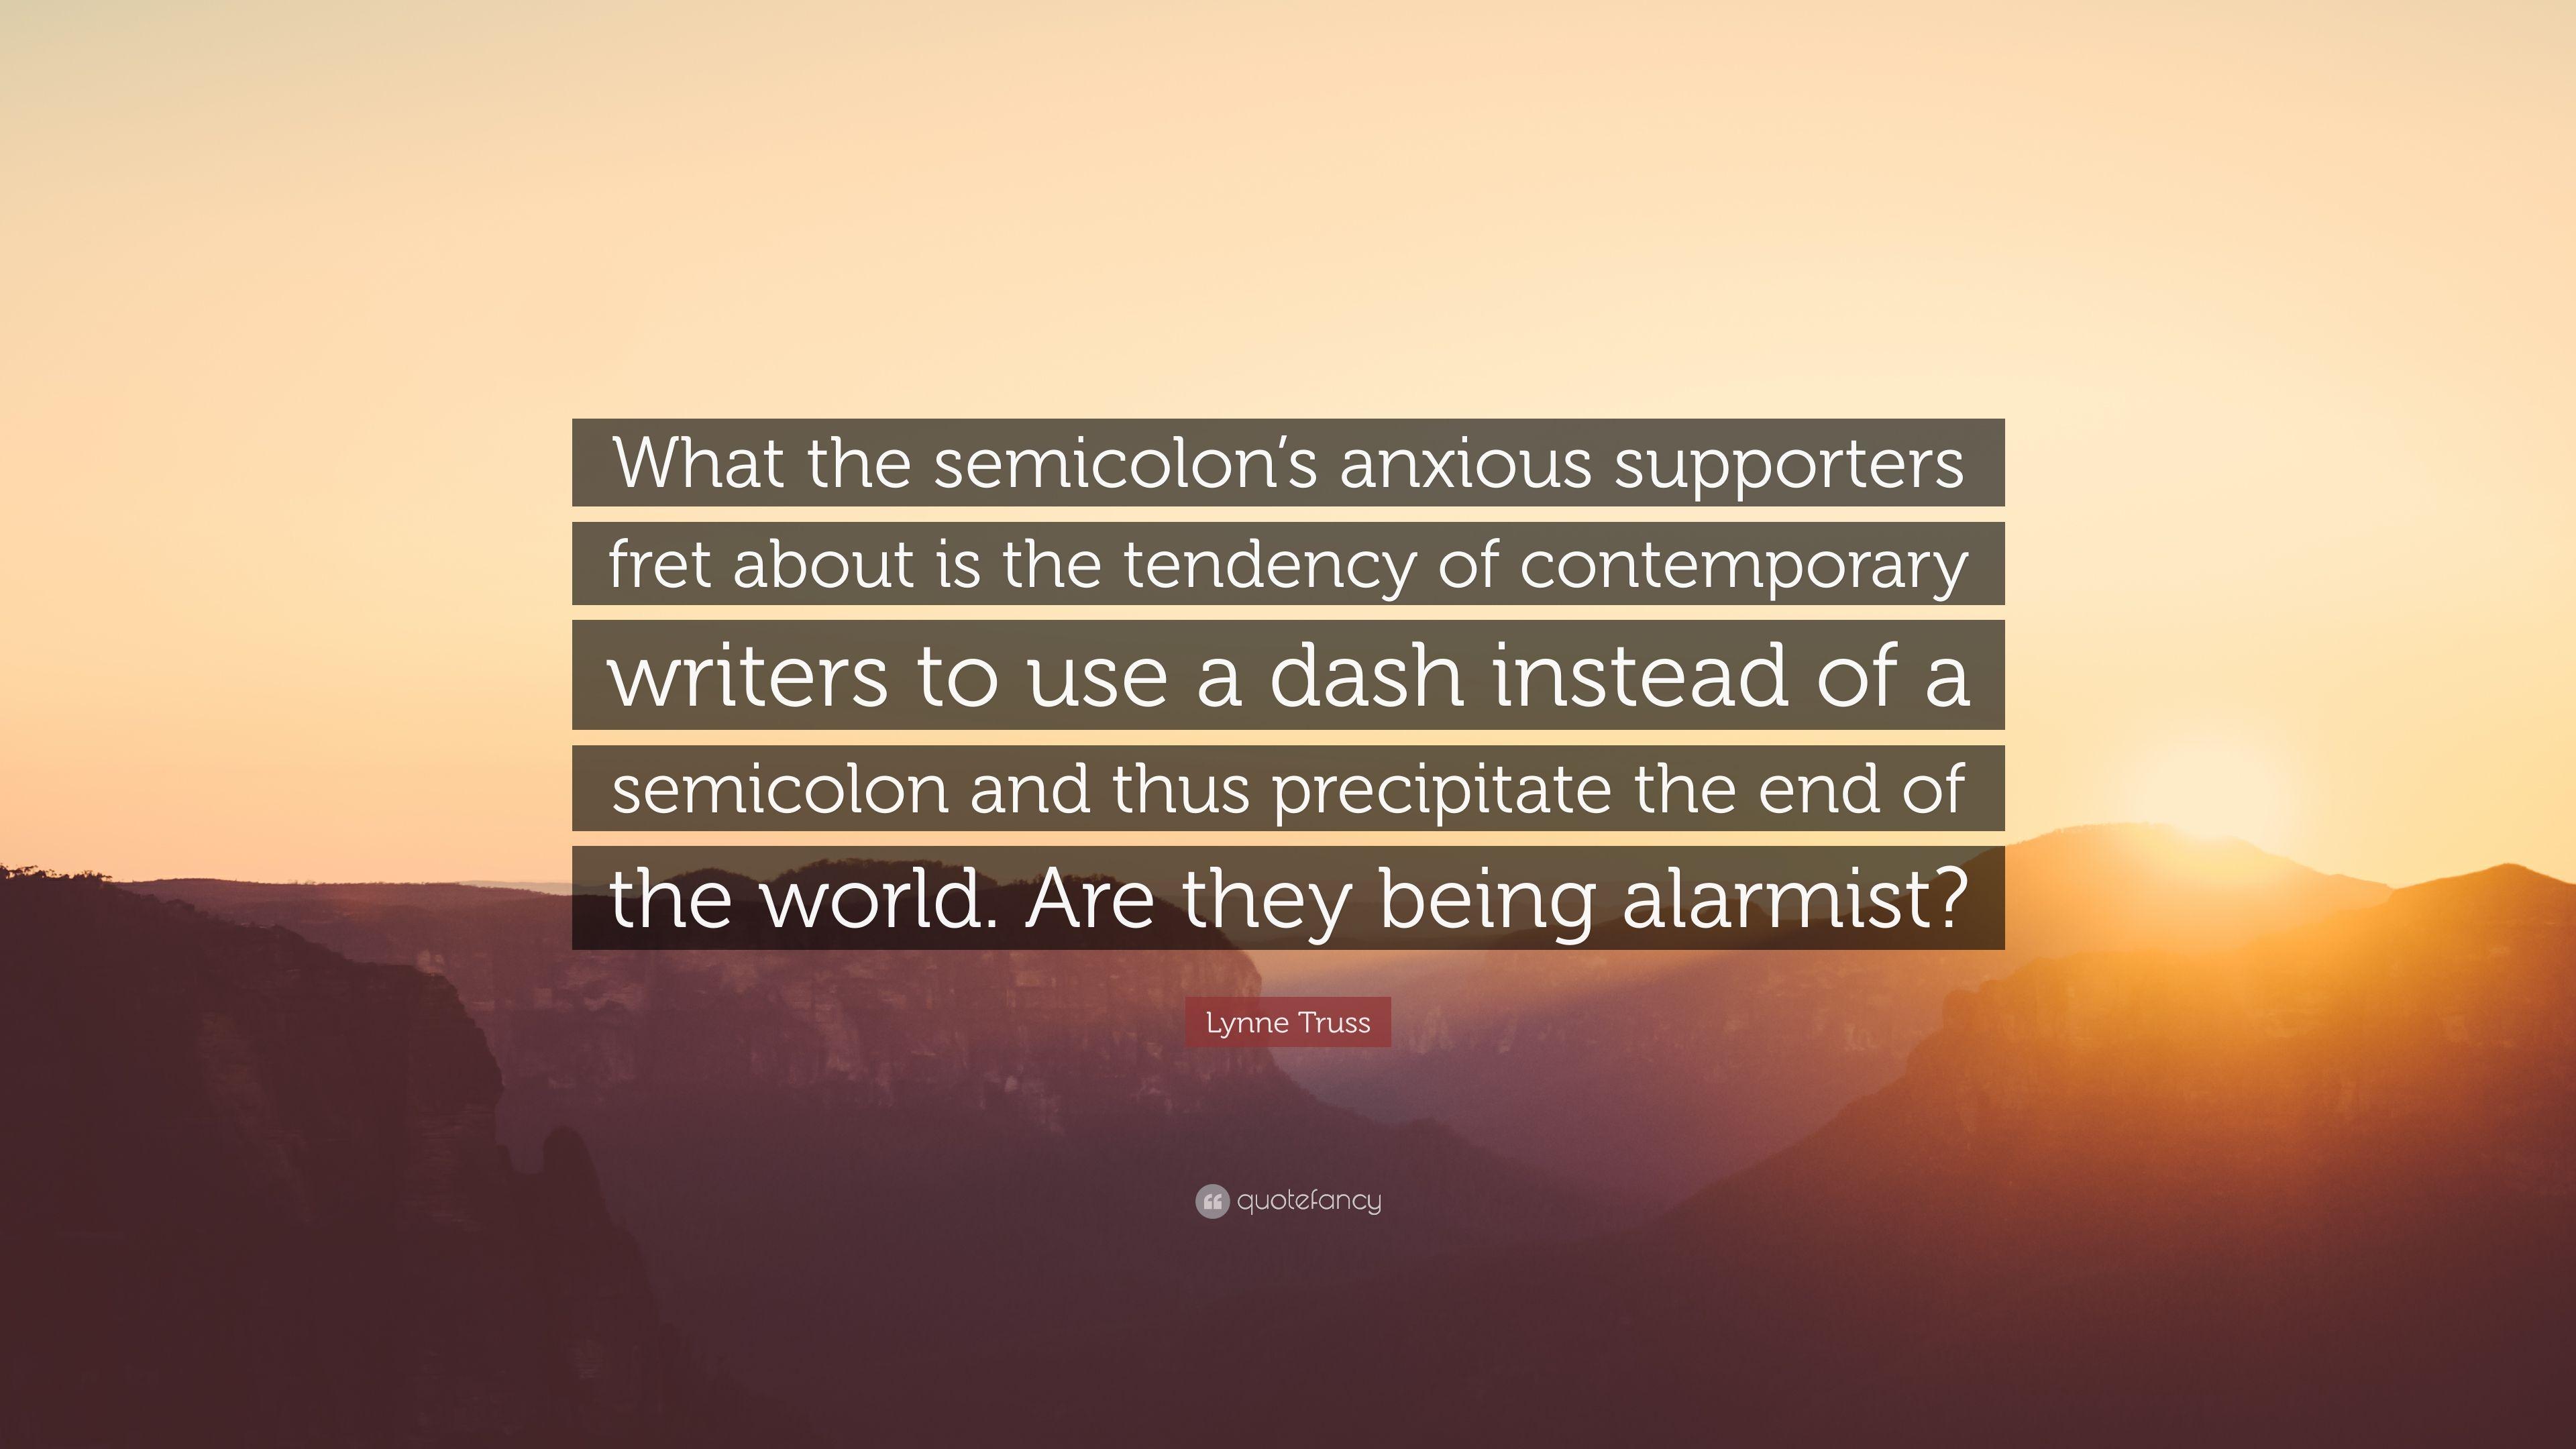 Lynne Truss Quote: “What the semicolon's anxious supporters fret